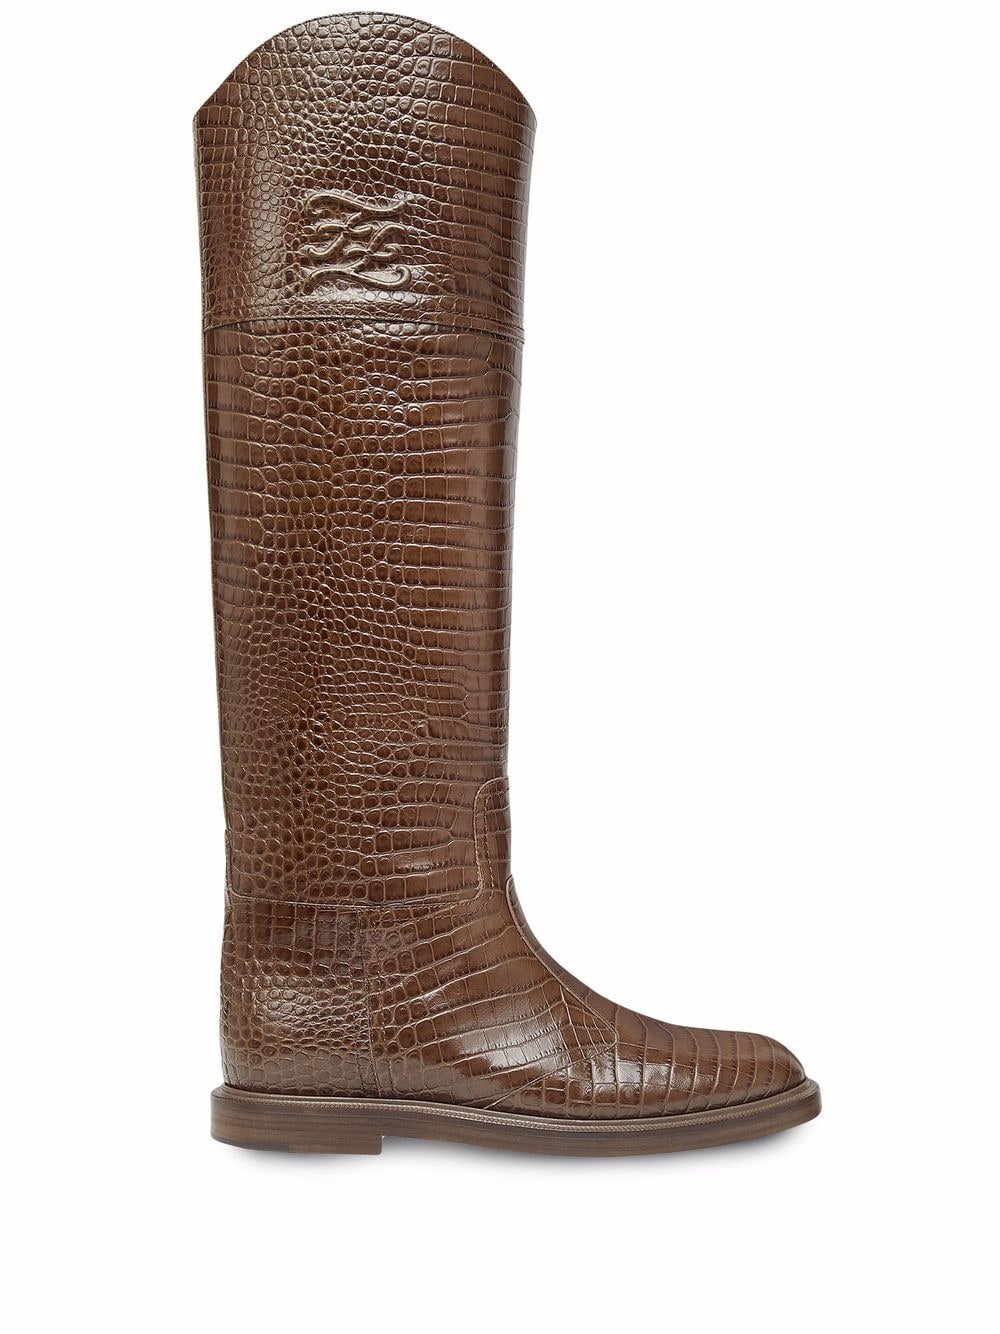 Karligraphy croc-effect knee-high boots